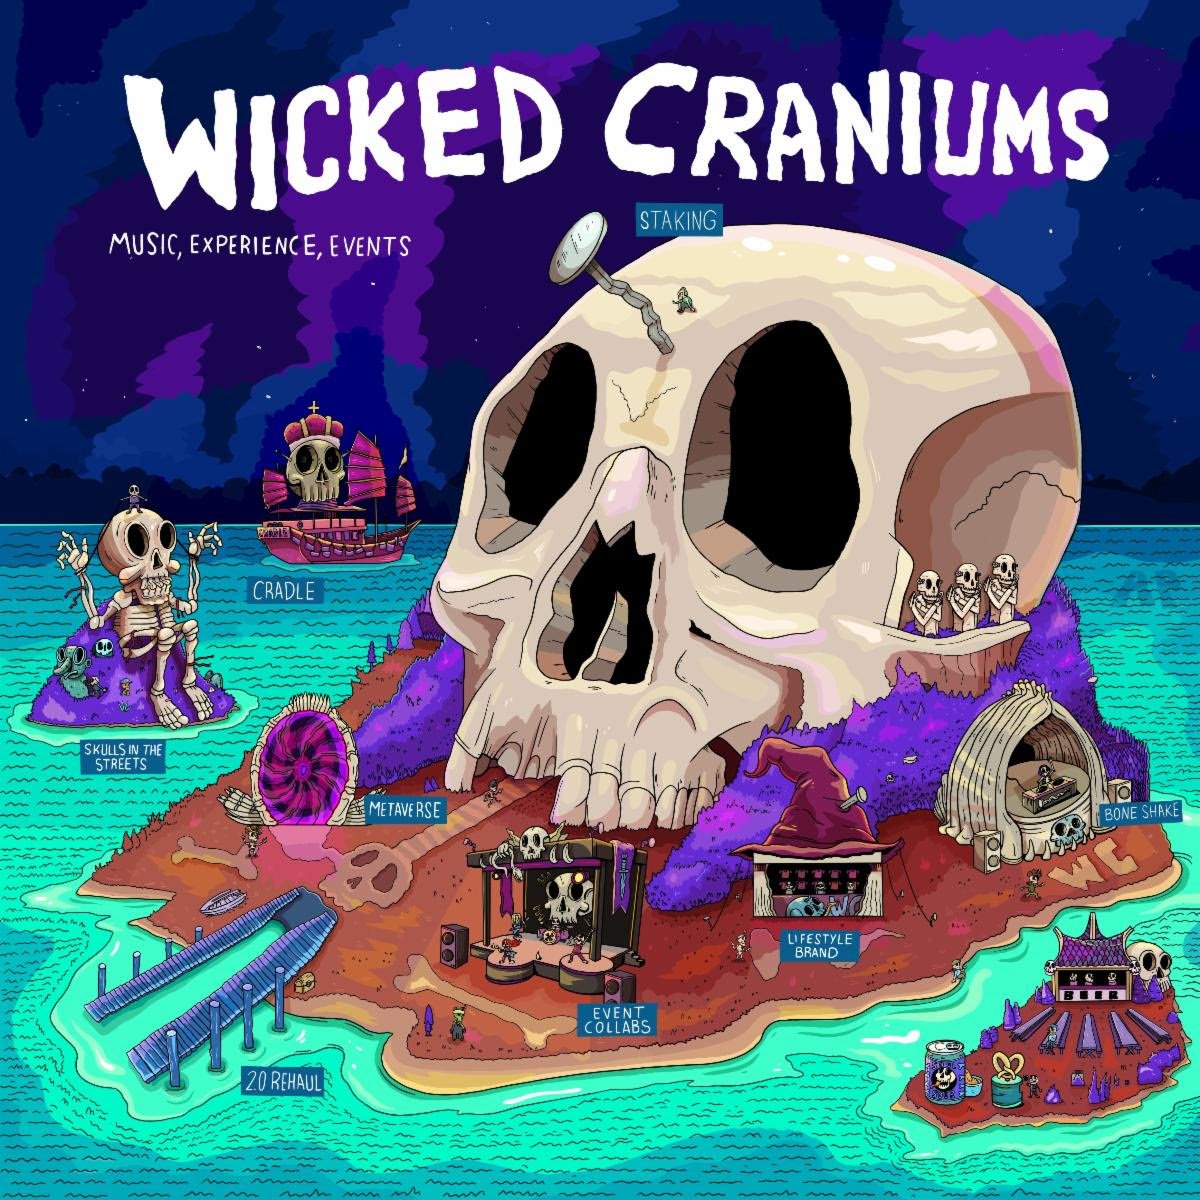 The image shows a poster of the Wicked Cranium NFT project